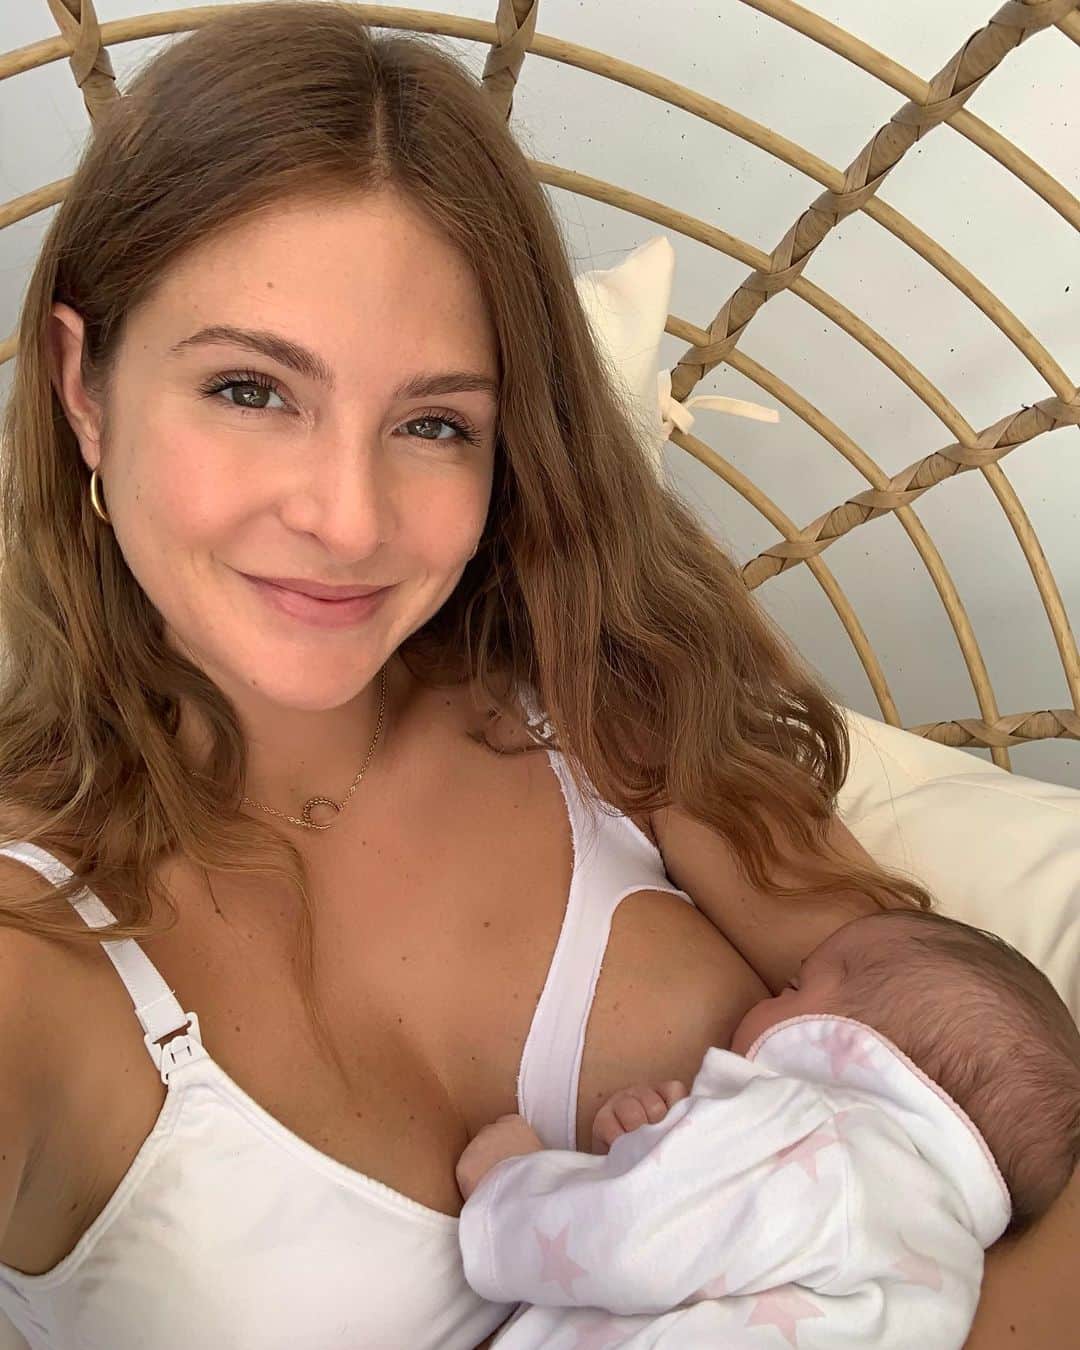 ミリー・マッキントッシュさんのインスタグラム写真 - (ミリー・マッキントッシュInstagram)「Let's talk about breastfeeding – I found it really tough at the beginning. Although Sienna now latches on easily and is a good eater, it definitely didn't start that way. The first few days I had blistered, cracked nipples and the pain was so intense, I really didn’t know how I was going to carry on. ⠀ I spent hours online trying to find the best ‘professional' advice on anything that would make the pain and dread stop, as I so desperately wanted to continue to breastfeed my baby girl. I found myself totally overwhelmed with all the conflicting advice which only made my anxiety worse. ⠀ I had a look on the @peanut app and discovered that they had a group especially for breastfeeding. The women were so kind and encouraged me to trust my own instincts and do what feels right for me. There really is no other advice that compares to other mums who have been in exactly the same situation because they have a wealth of knowledge and suggestions. ⠀ I found so many great tips about feeding from one or both boobs for each feed, the best time of day to pump, which supplements help regulate your flow, what foods to eat or avoid, how to use nipple shields, different feeding routines and schedules etc. The support and advice I have received from the women on @peanut has been invaluable and made me feel less alone (I know I’m not but breastfeeding can convince you otherwise!) ⠀ I’ve also found my appetite is sky high.. so like her, when I'm feeding, I also need feeding! I end up eating most of my meals cold and with one hand, which has resulted in me spilling food on her on numerous occasions! Despite the blood, sweat, tears, and feeling like I’m leaking milk through countless outfits…it’s all worth it when I look down and see Sienna's tiny hand wrapped around my finger, watching her grow stronger every day. My heart melts when she gives the gift of a little smile. Motherhood really is a journey, and that's why sharing stories & tips is so important. I encourage any mothers, expectant mothers and those trying to conceive to join the app. It's the support system we all need. #peanutapp #ad ⠀」6月22日 15時59分 - milliemackintosh